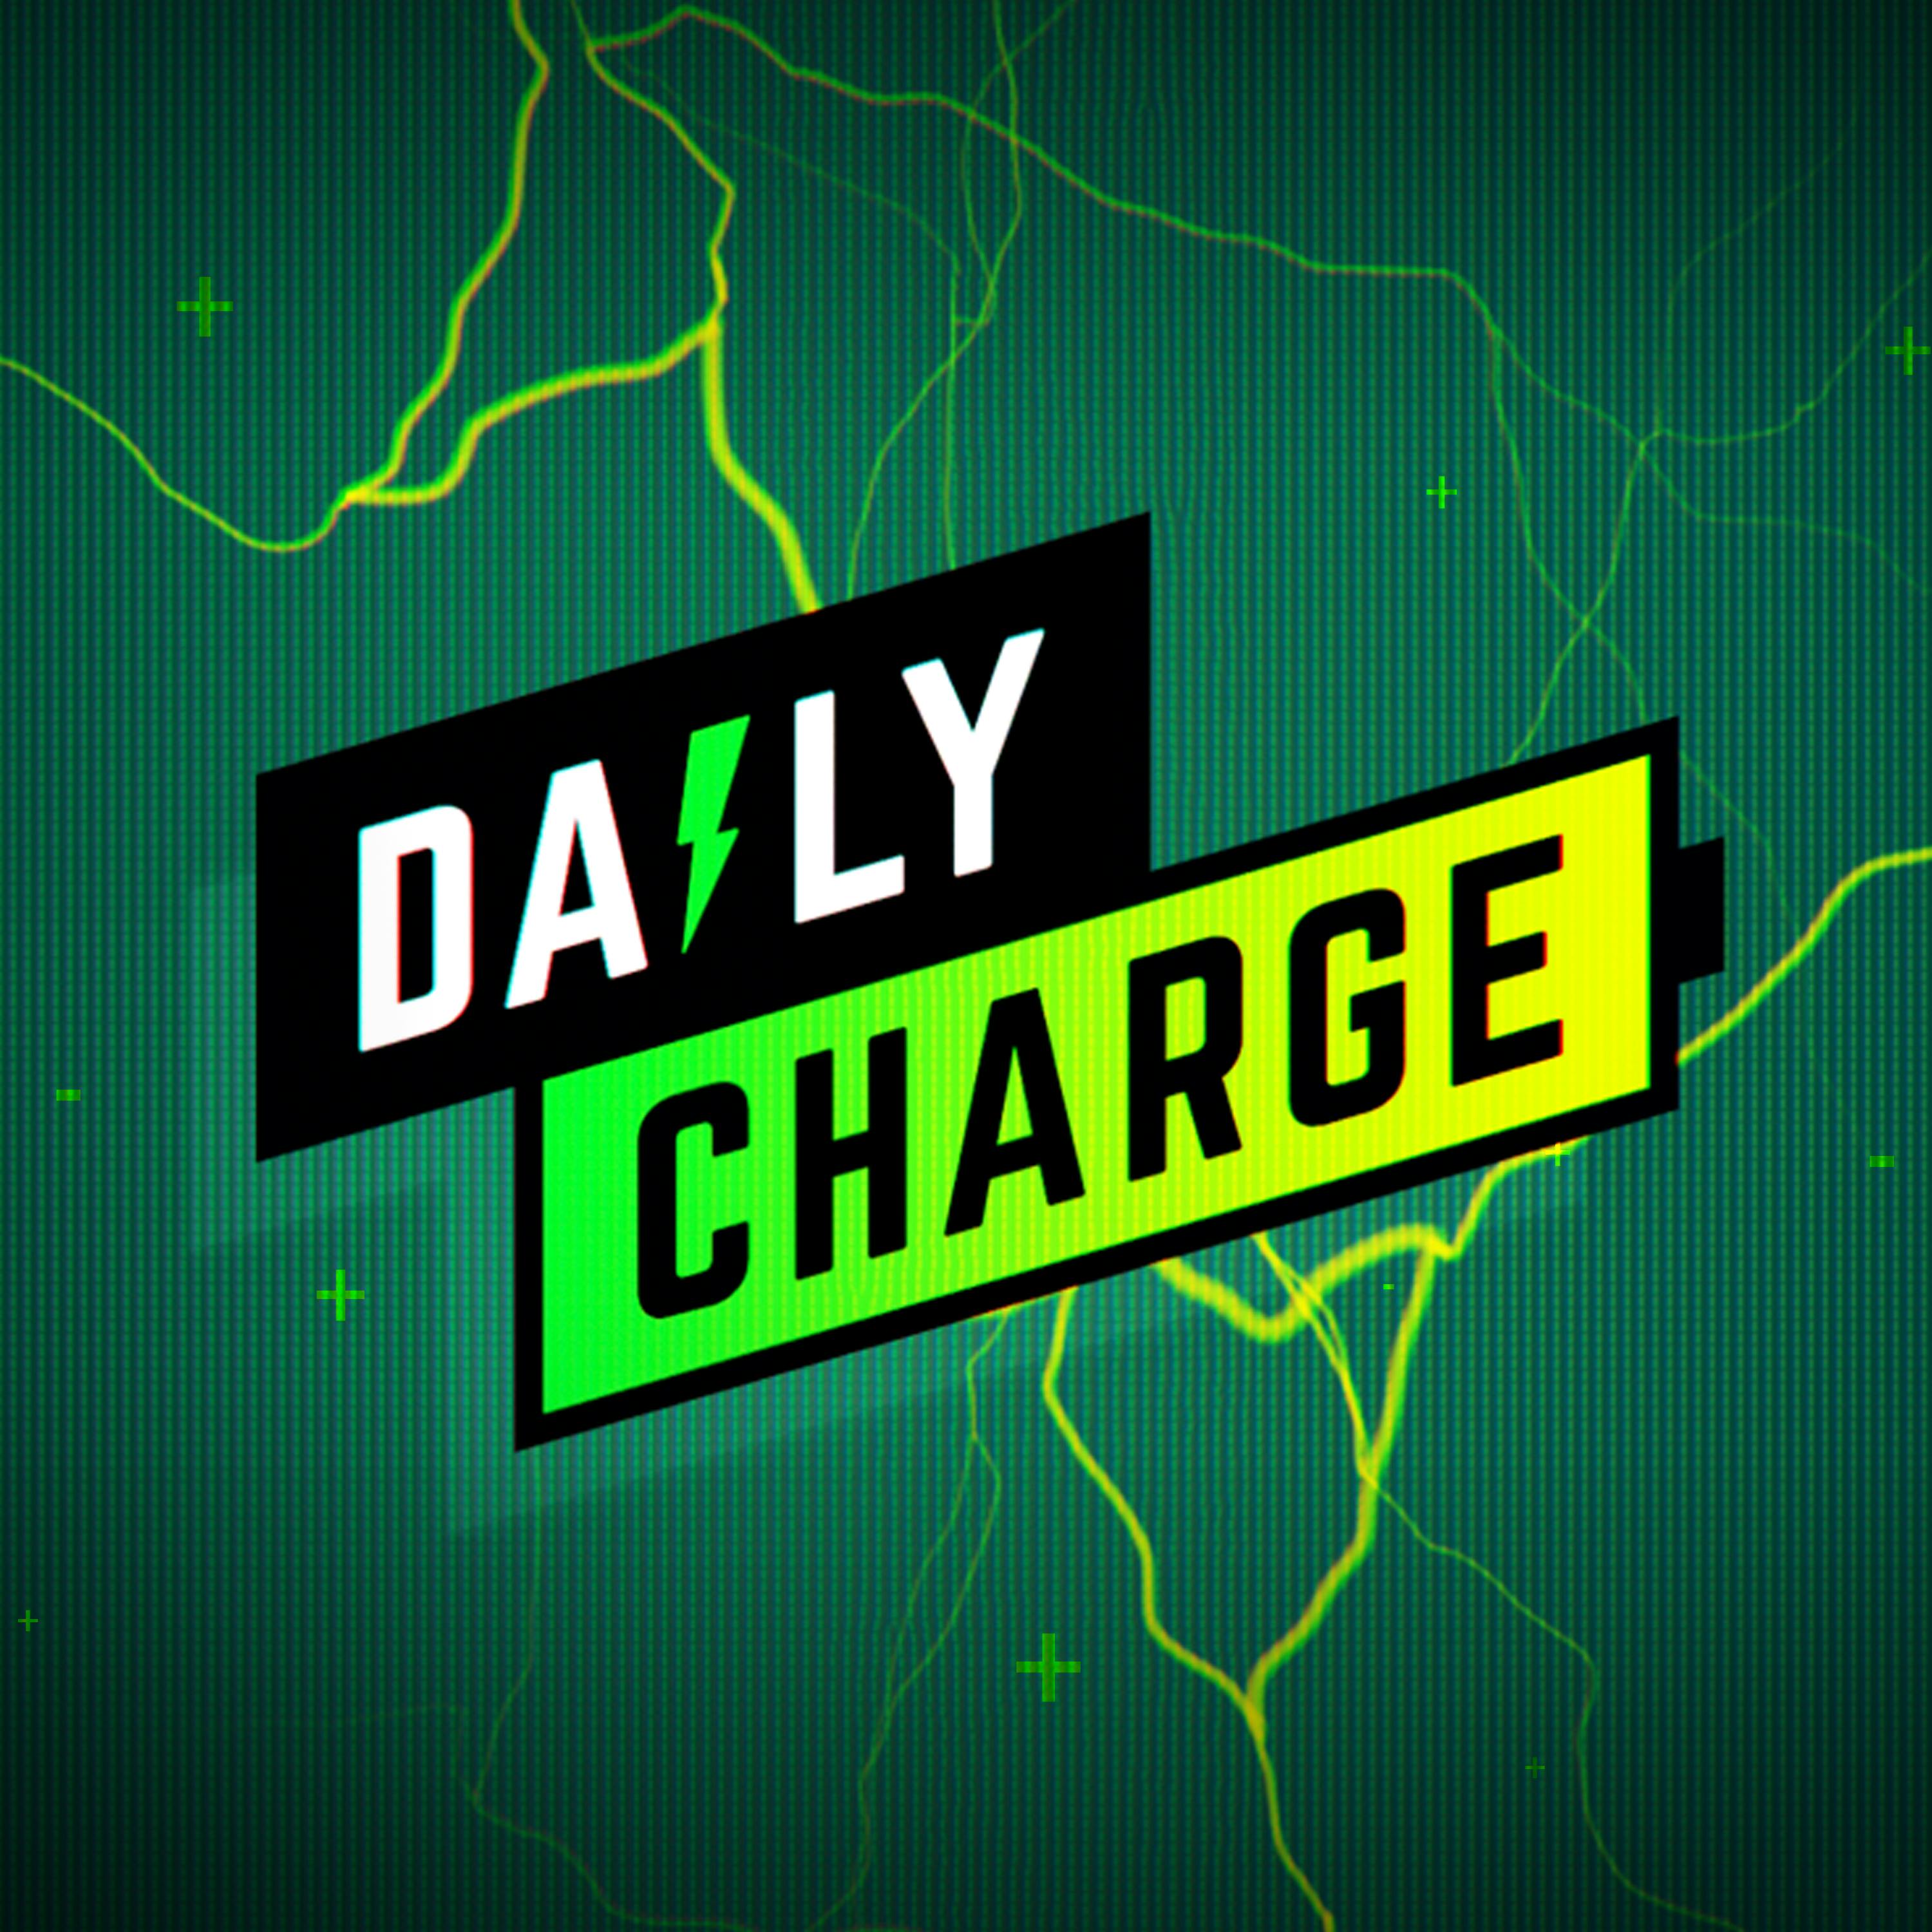 Samsung’s Galaxy S22 Ultra is really just the new Galaxy Note (The Daily Charge, 2/15/2022)